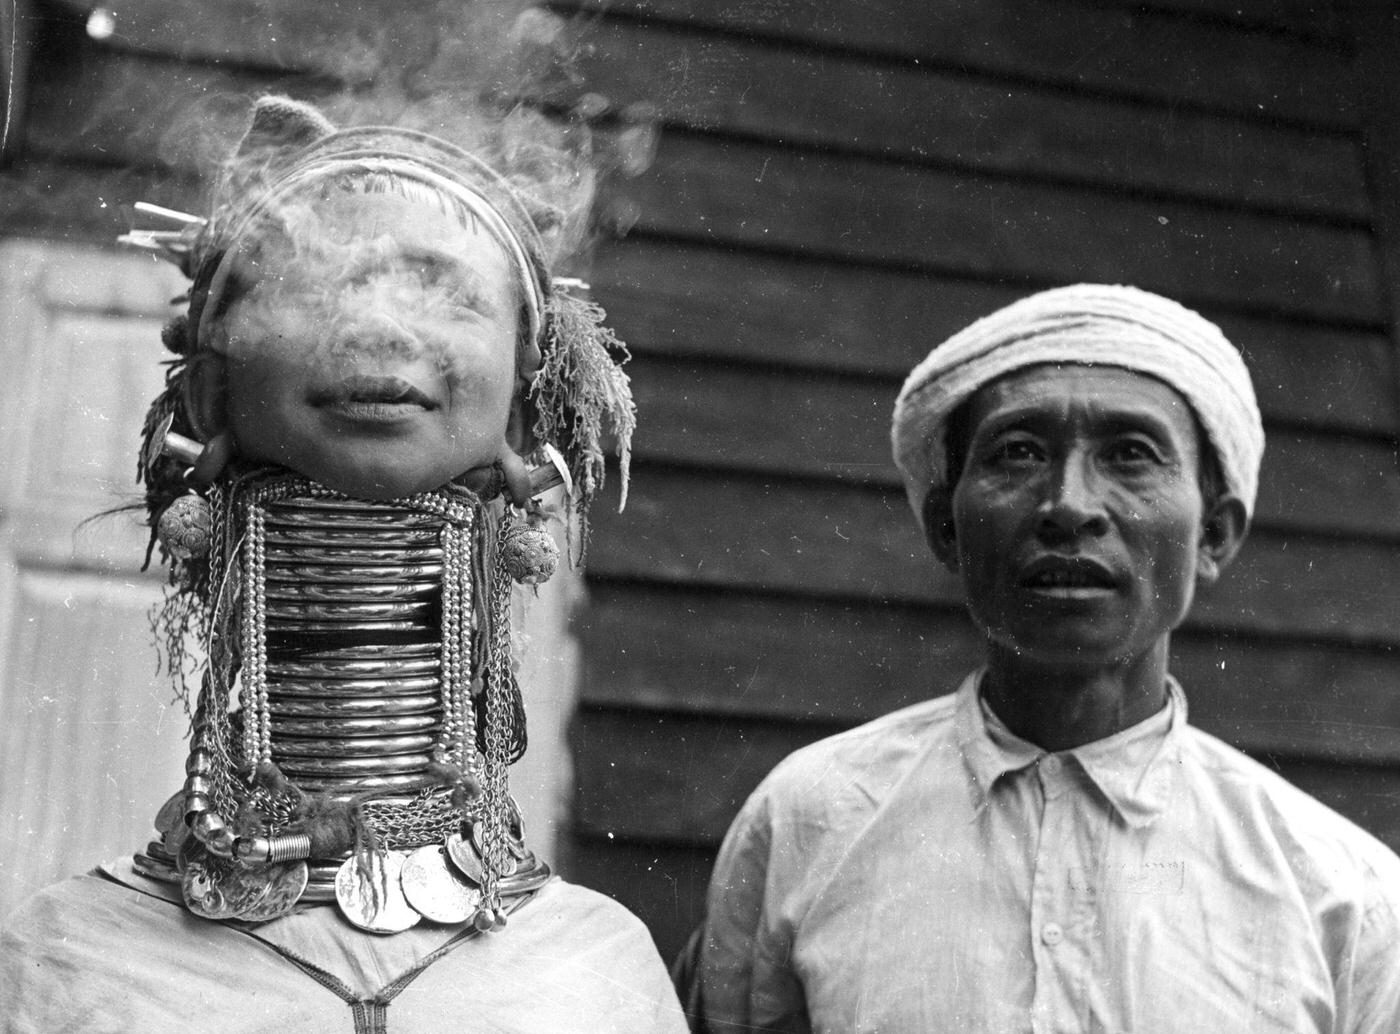 Padaung woman exhaling smoke, known for brass rings fitted to their necks and limbs, Burma, 1955.